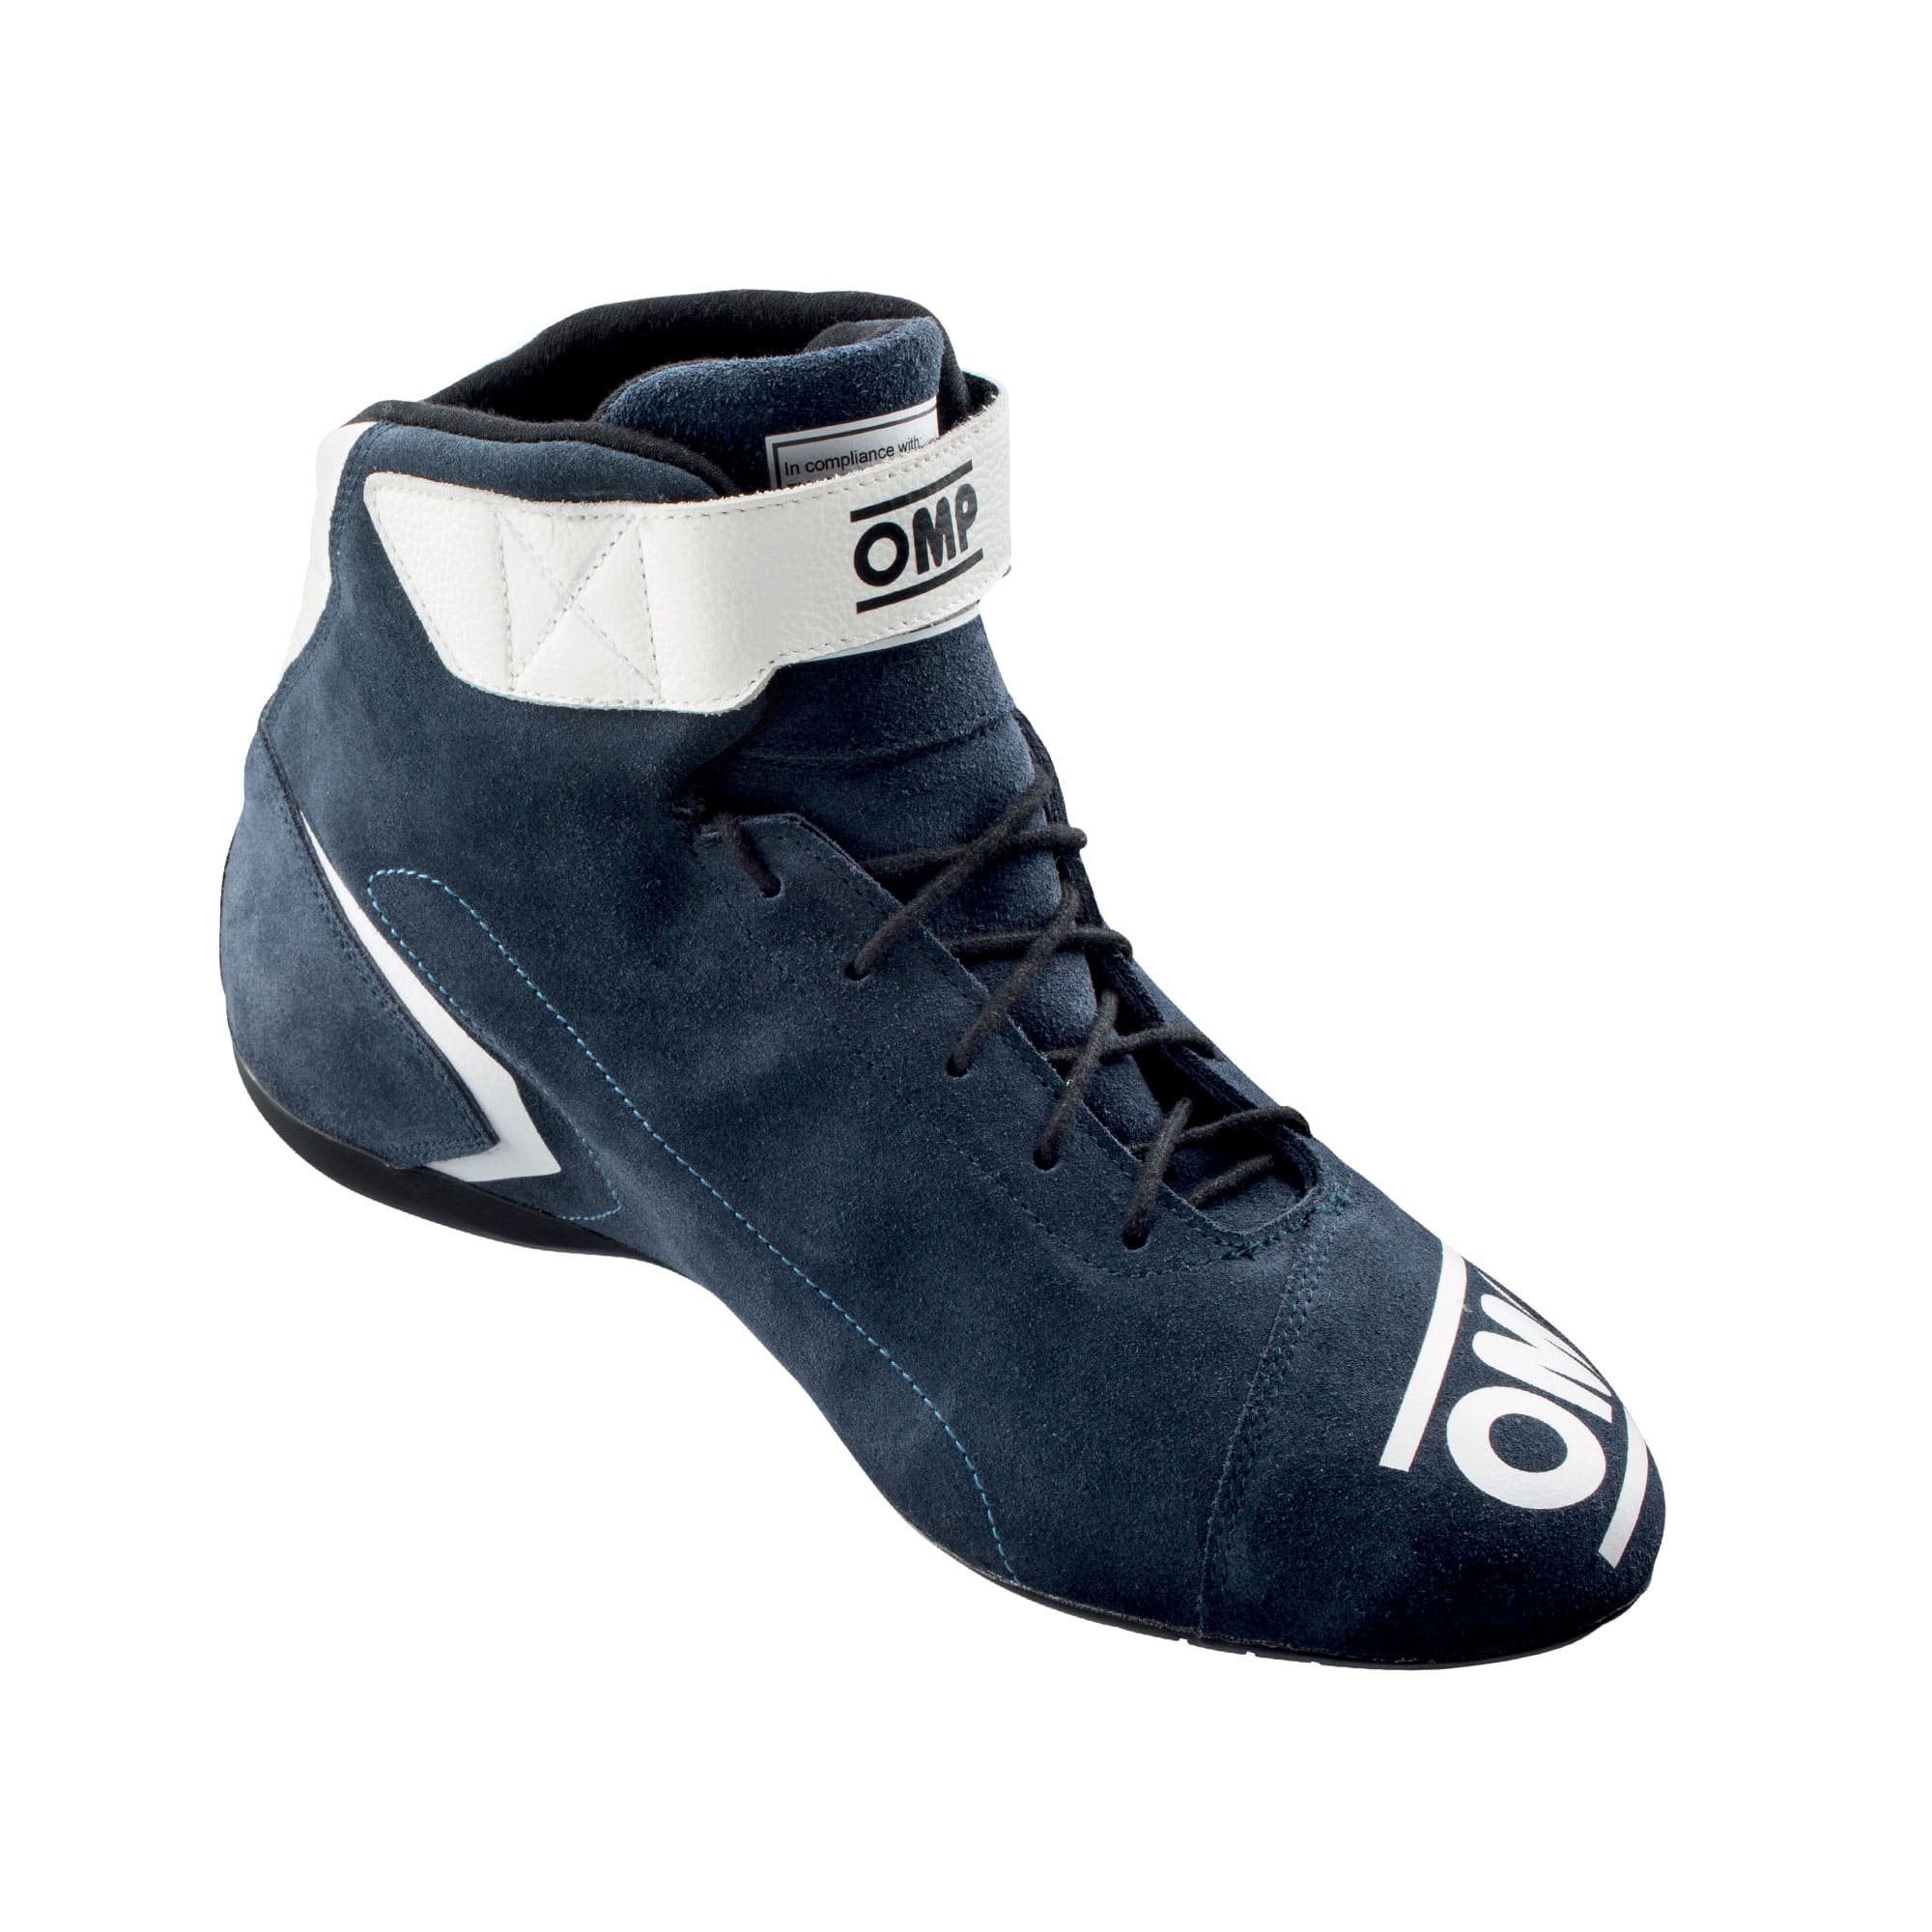 Scarpe-First-Shoes-Omp-Blu-Navy-Ciano-IC-824242-2